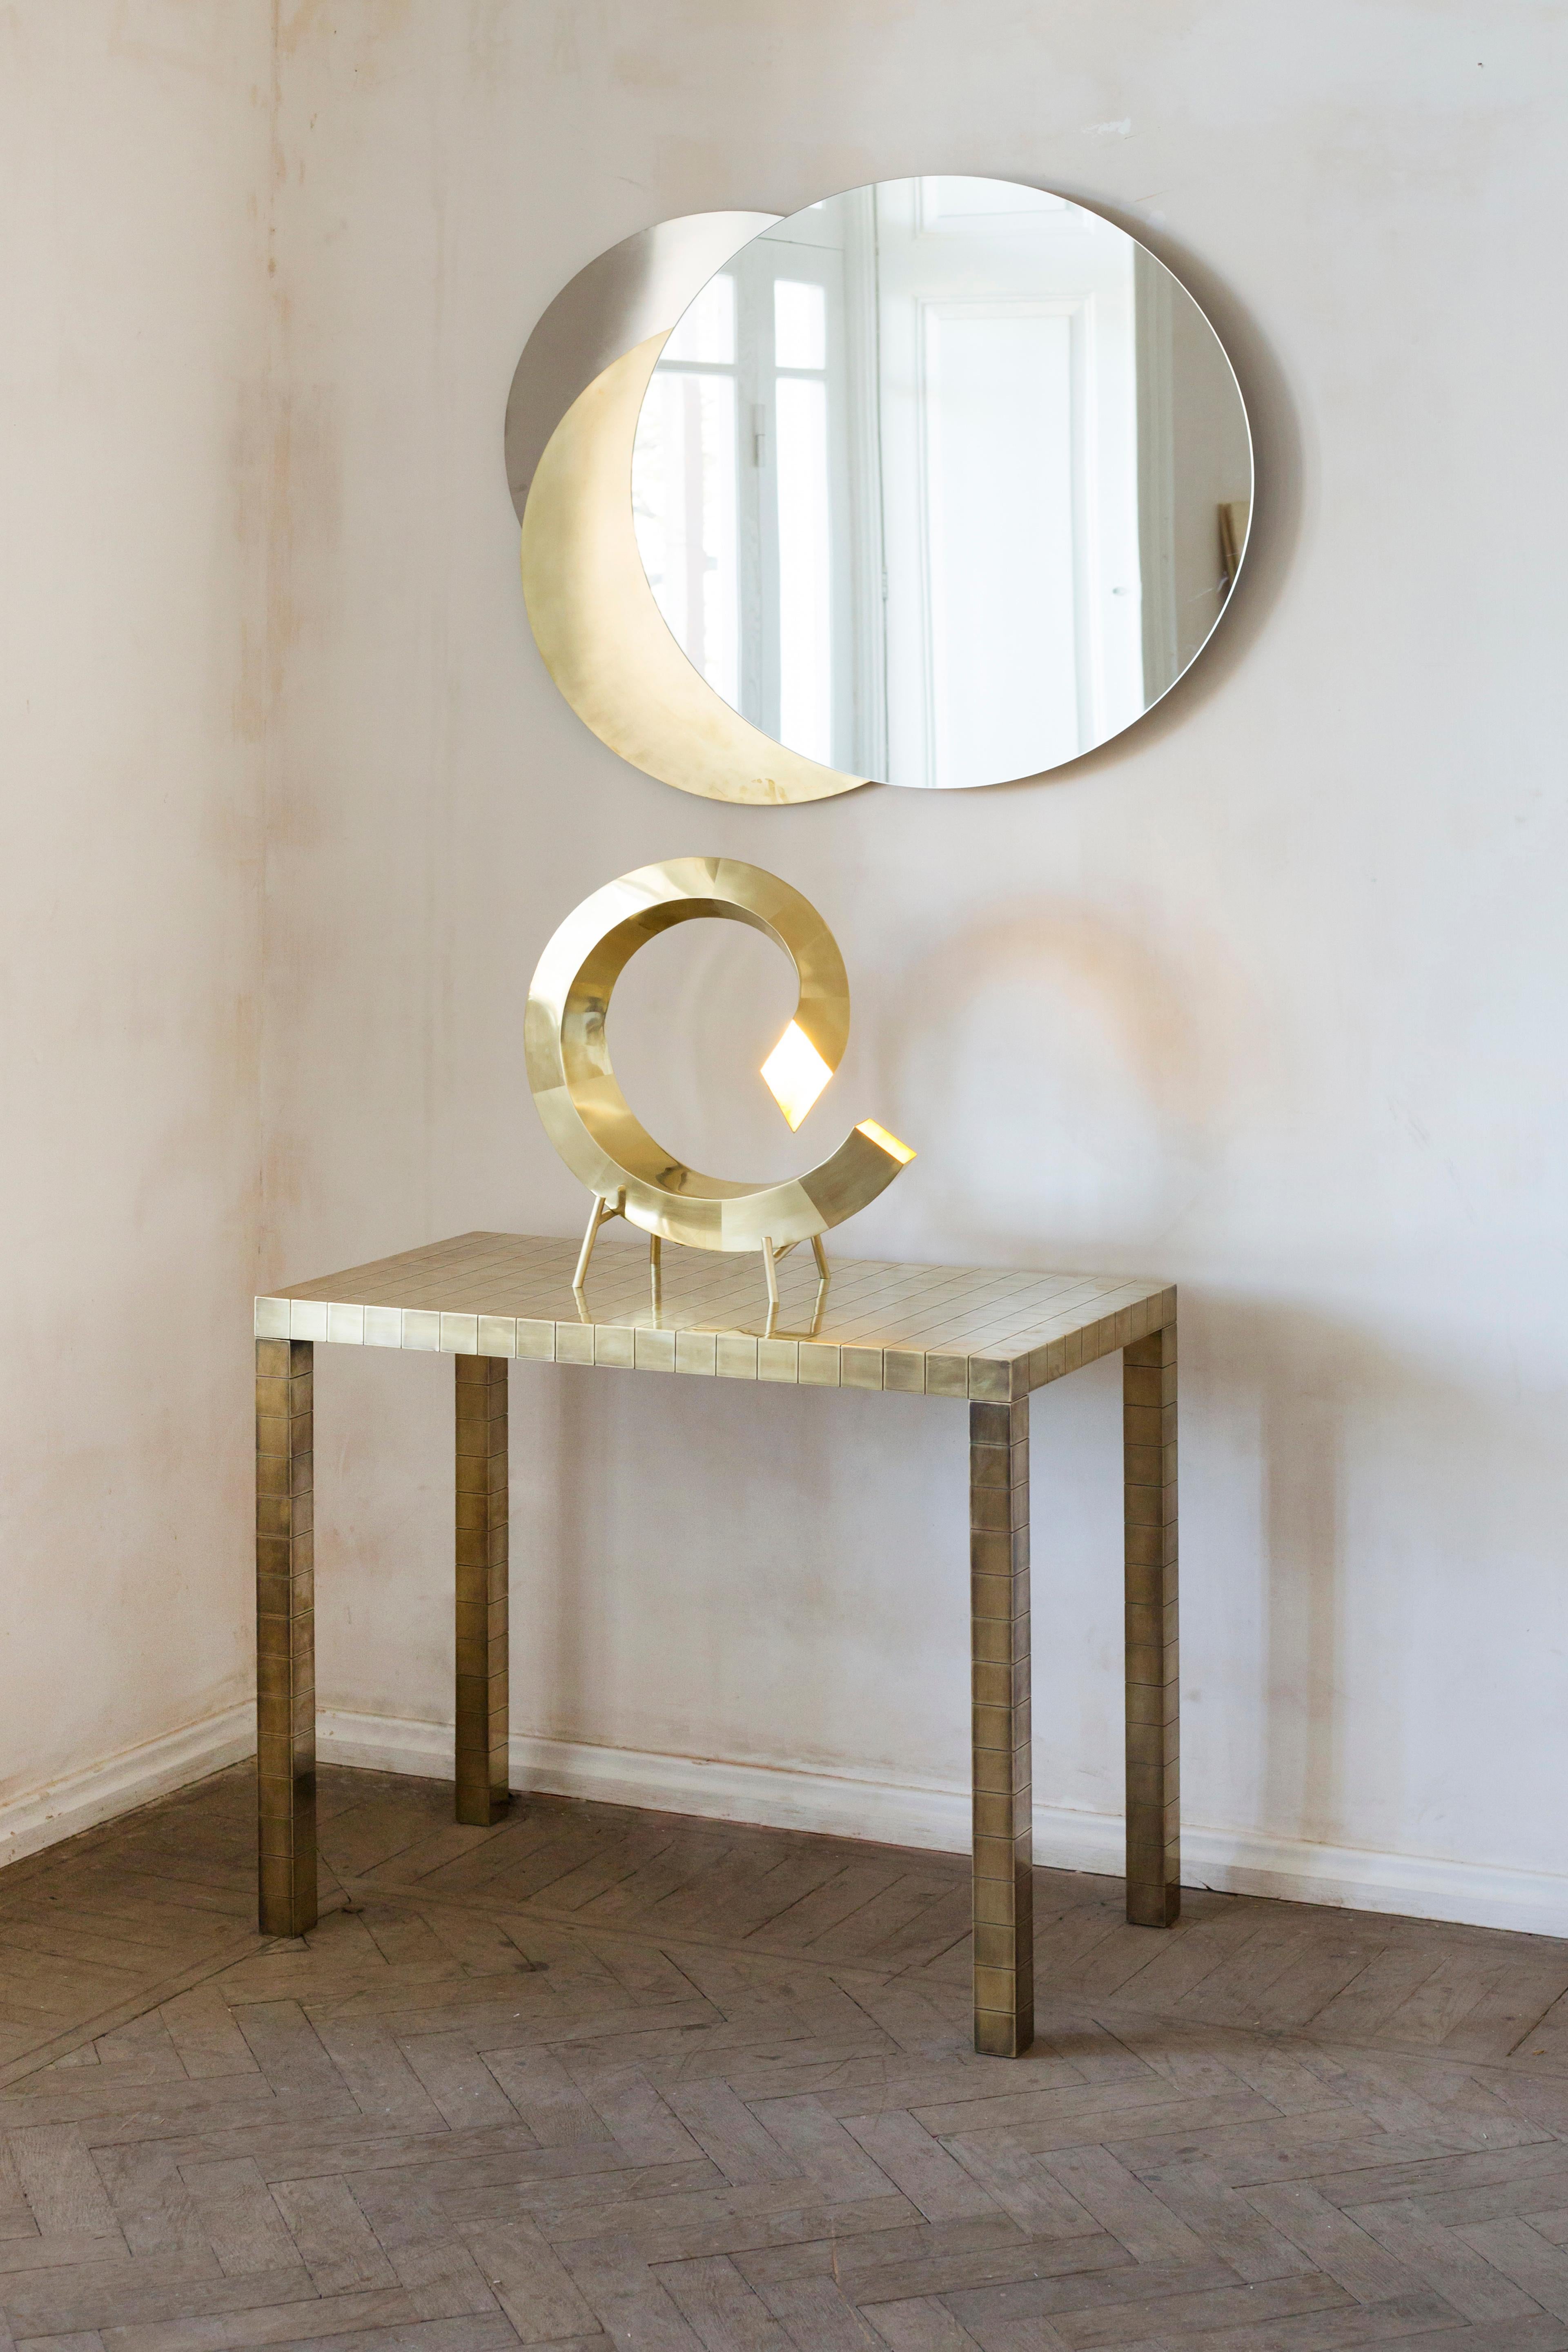 Metal Eclipse Mirror

Materials: Brass, steel, mirror 

Eclipse Mirror combines brass and steel discs with a round mirror placed in the front. With handcrafted simplicity, the Eclipse Mirror is a graphic depiction of an eclipse. The wall scone turns